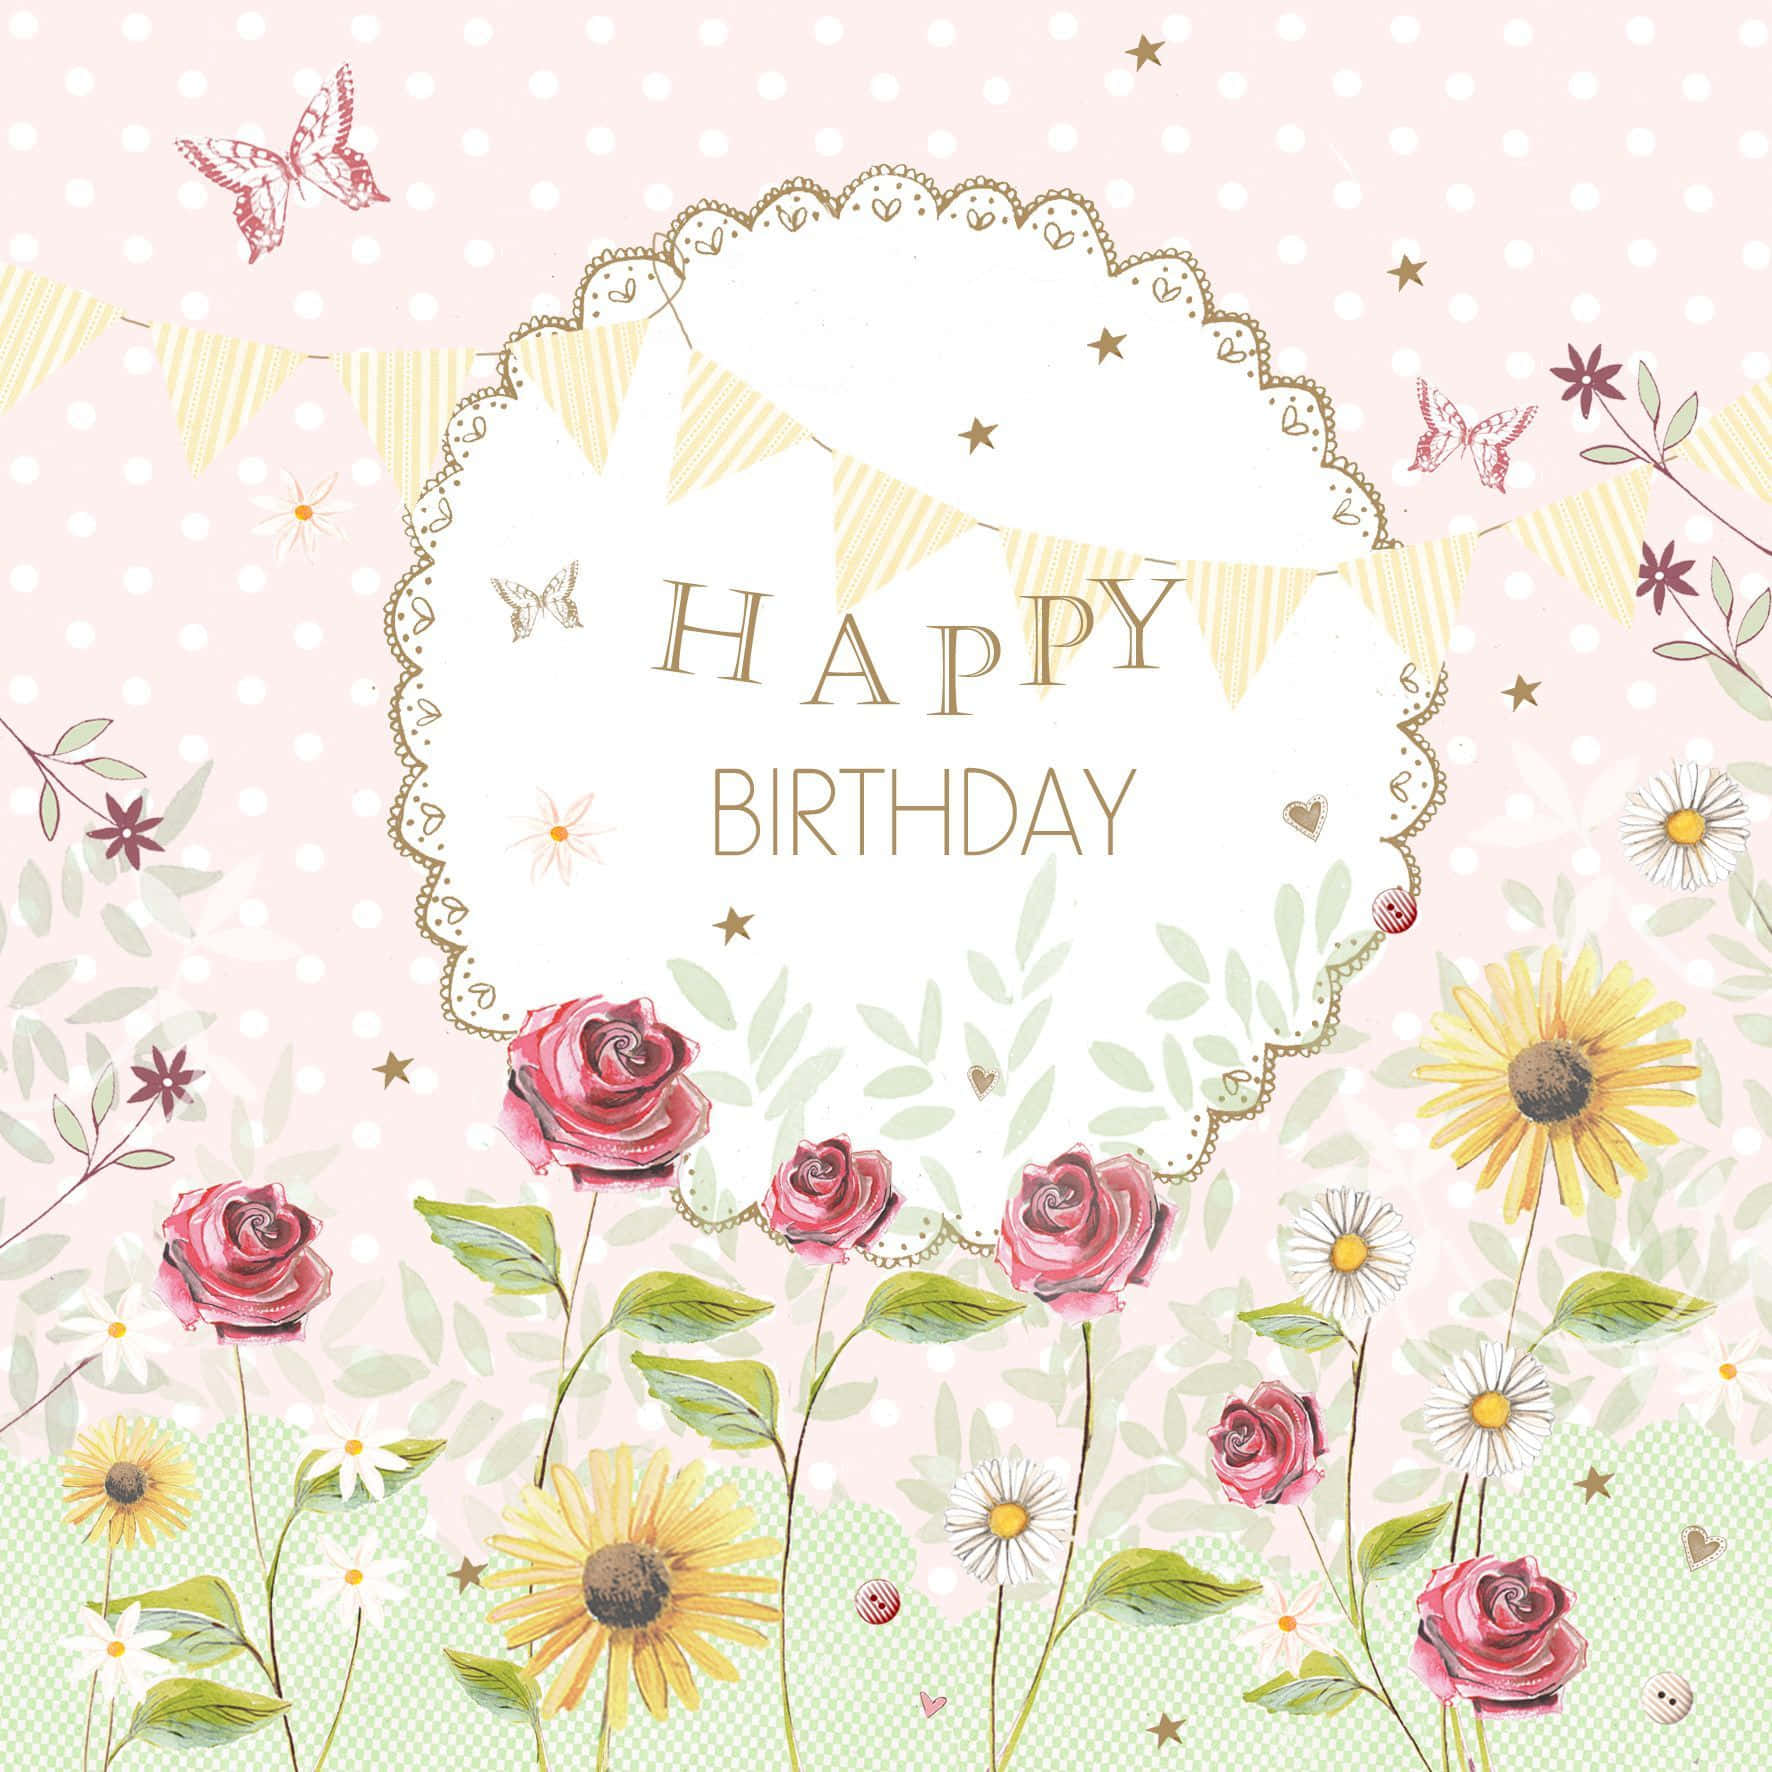 Impressive Birthday Card With Flowers Picture